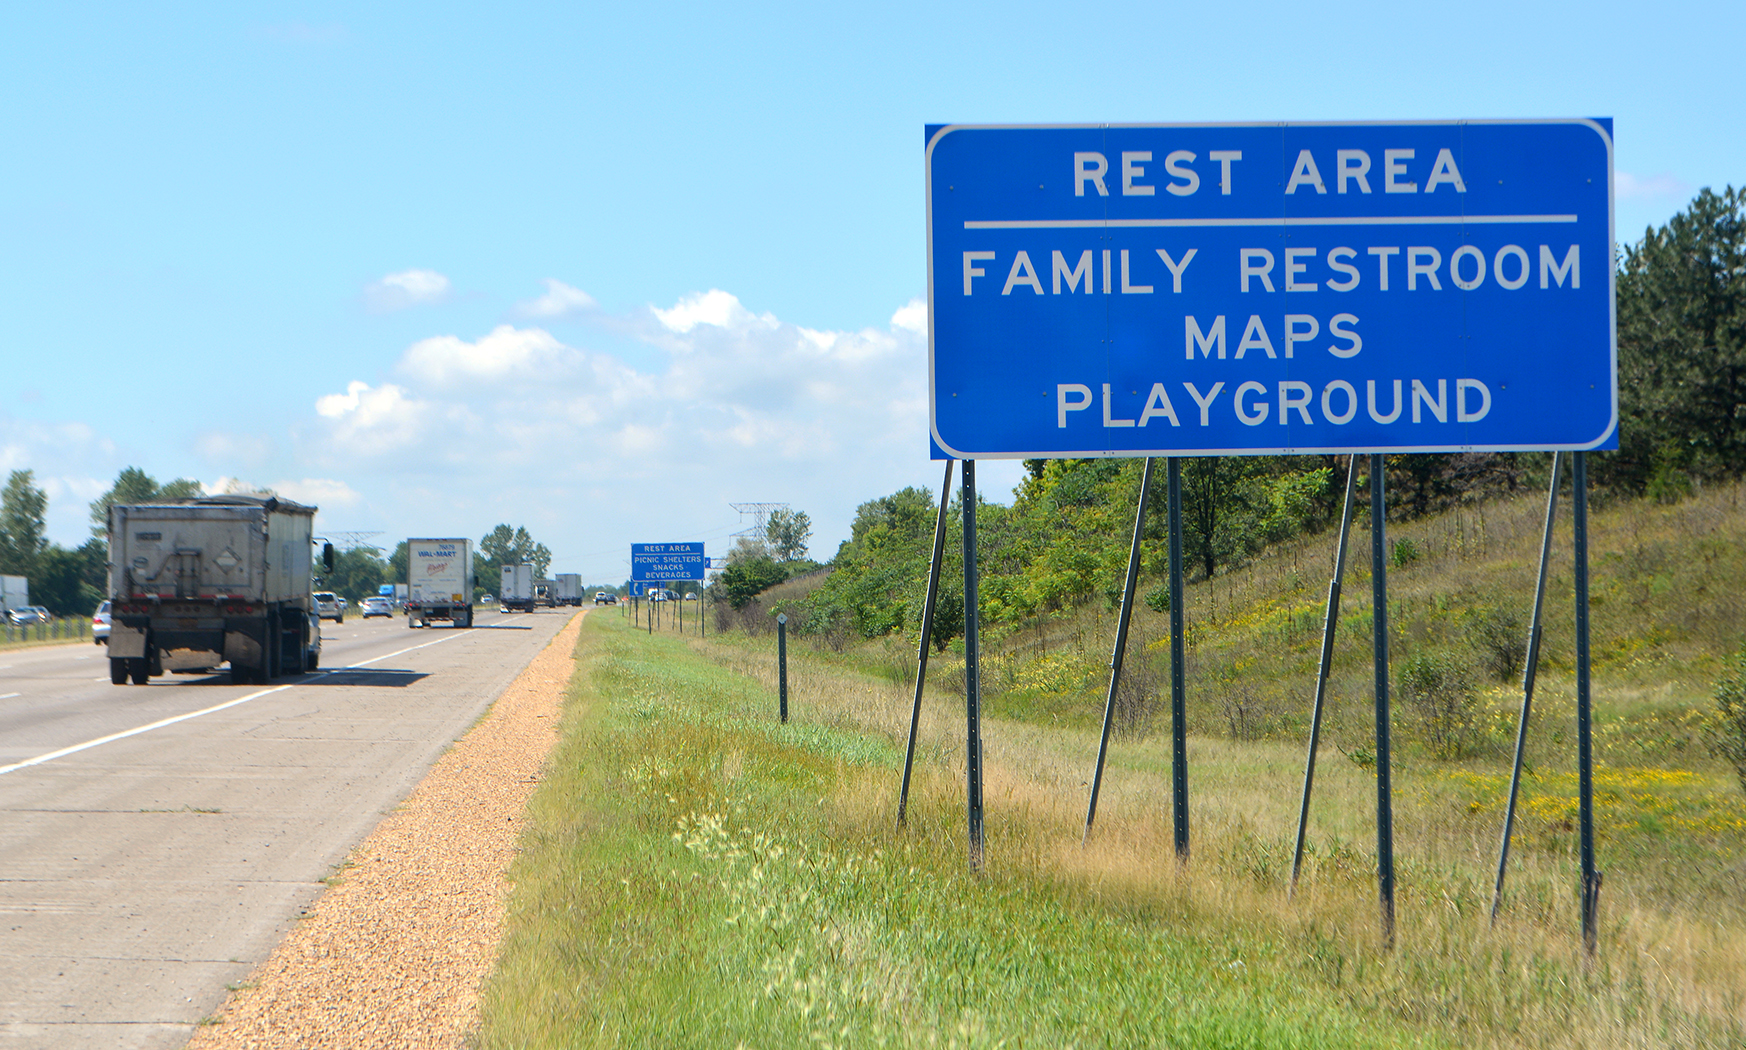 This photo shows a highway sign which has the words Rest Area on the top line, listing ameneties family restroom, maps and playground written underneath that.